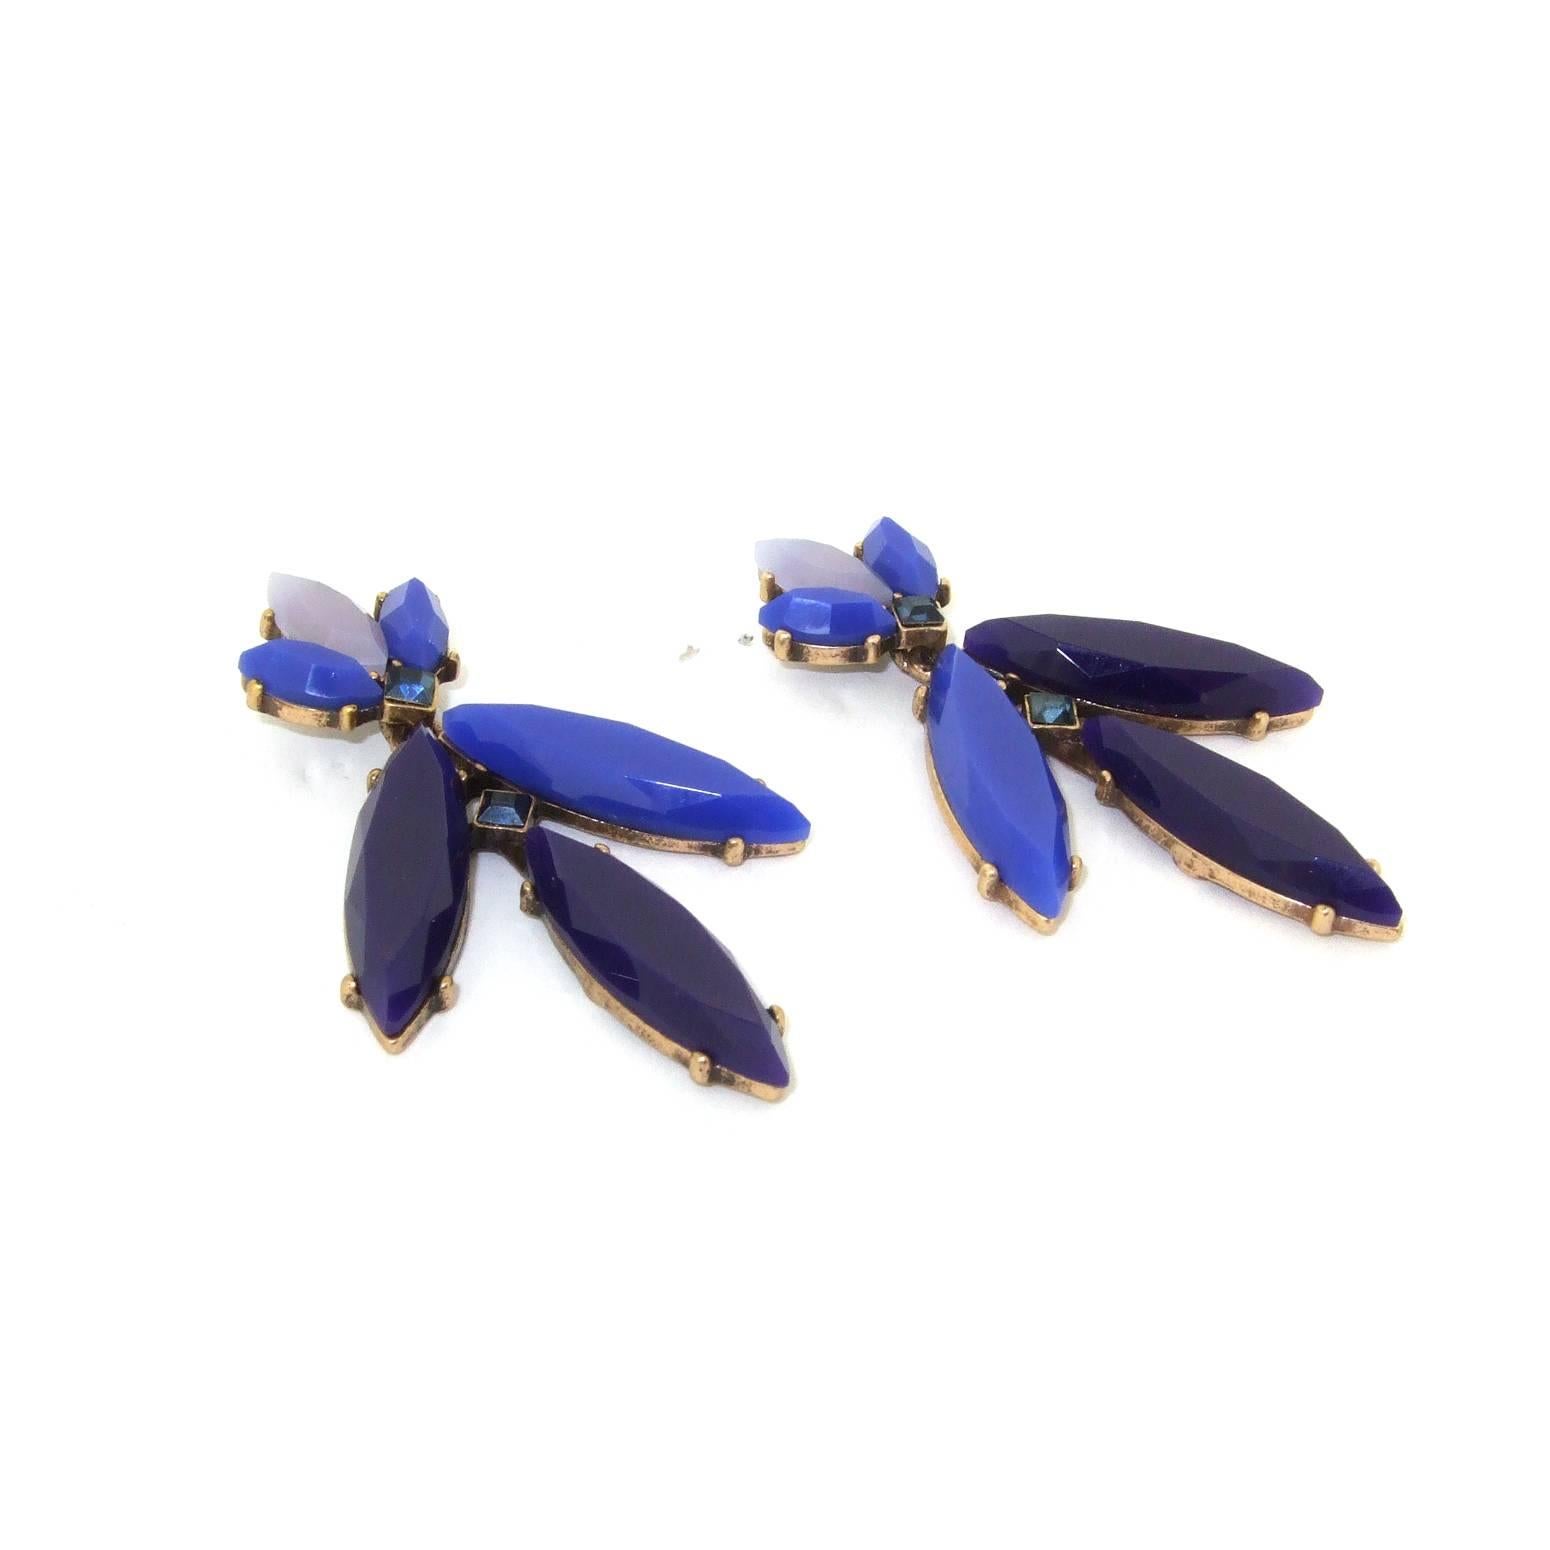 A pair of blue pierced earrings by Oscar De La Renta set with acrylic blue 'leaves' and royal blue swarovski crystal.

They measure 5.5cm drop by 2.3cm at the widest point. 

We have the matching necklace available in a separate listing. 